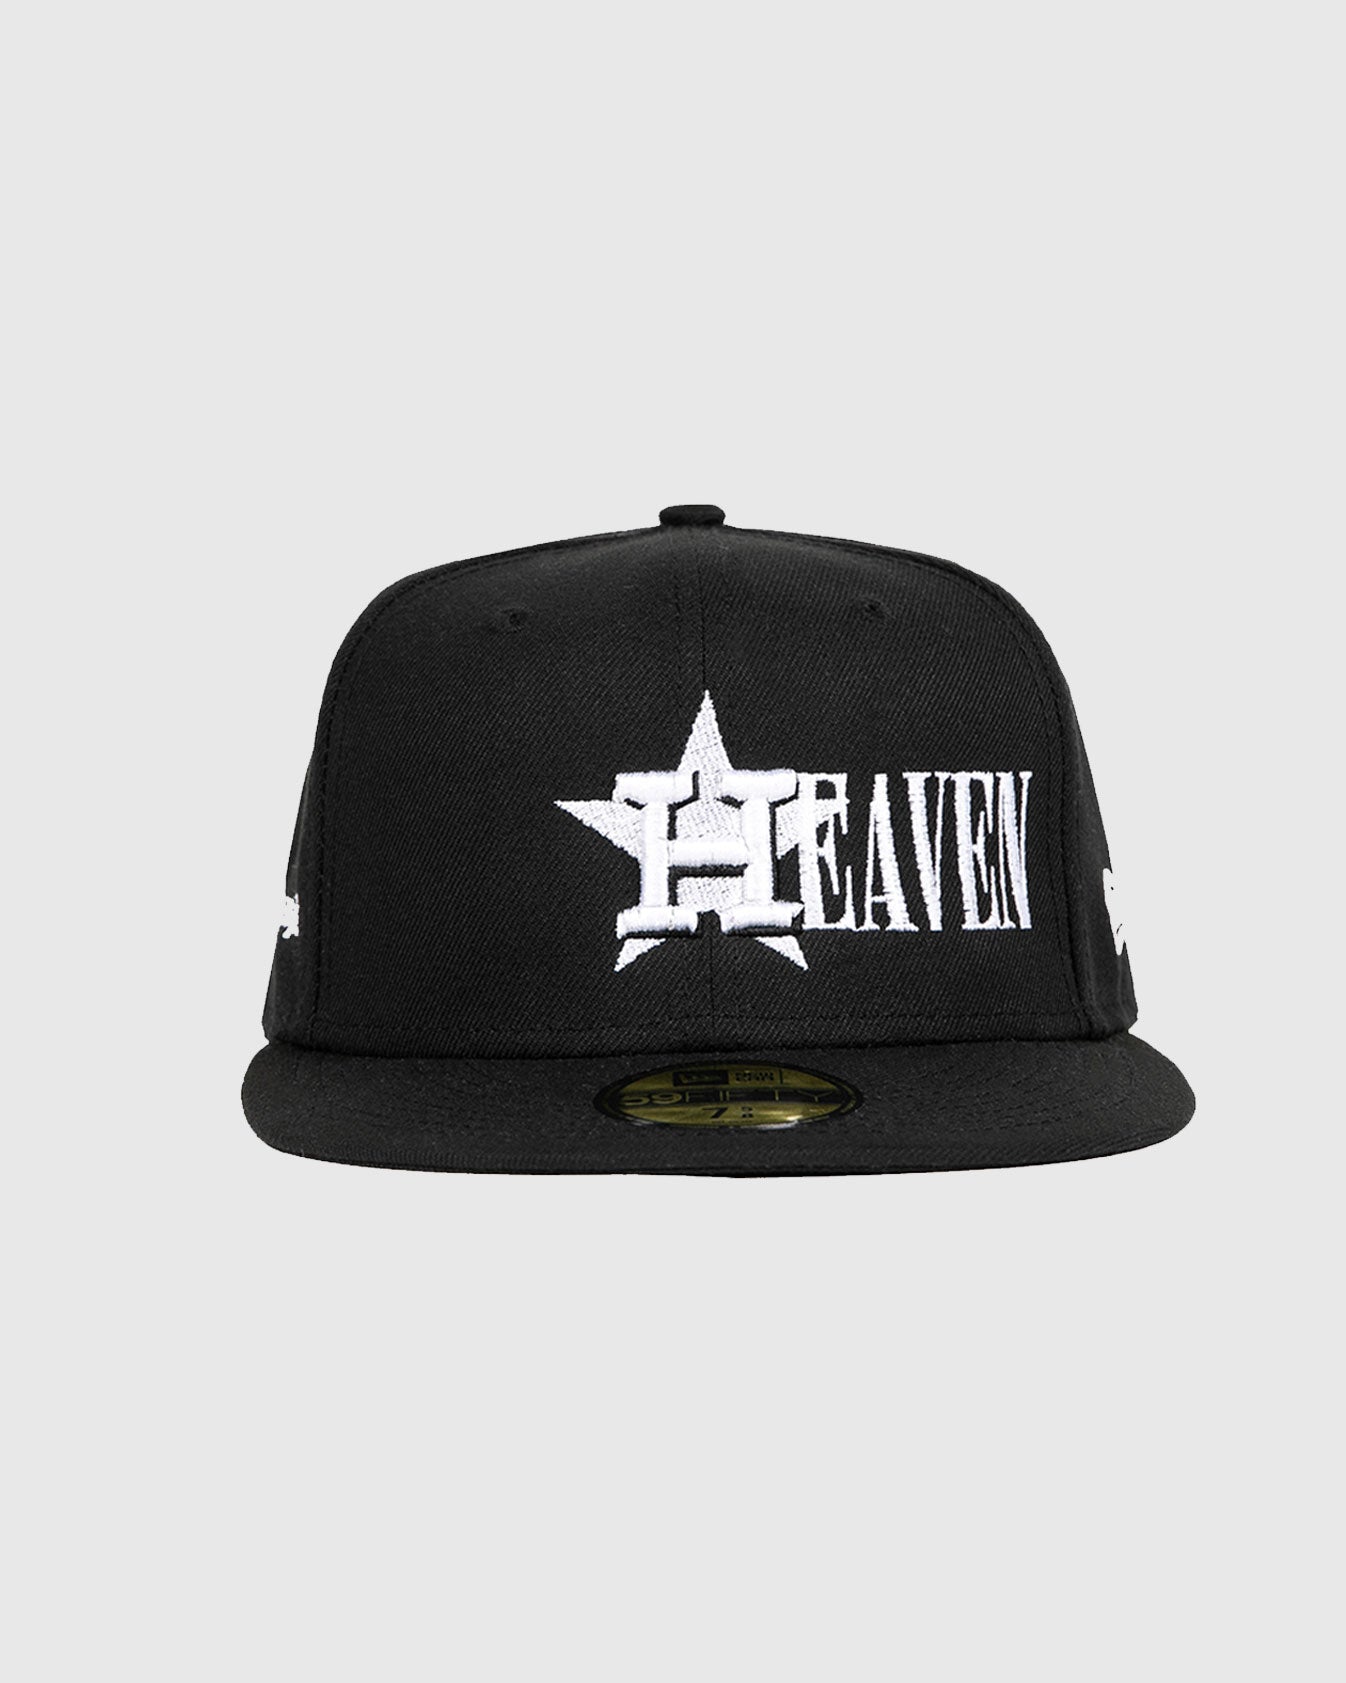 HEAVEN ASTROS NEW FITTED CAP